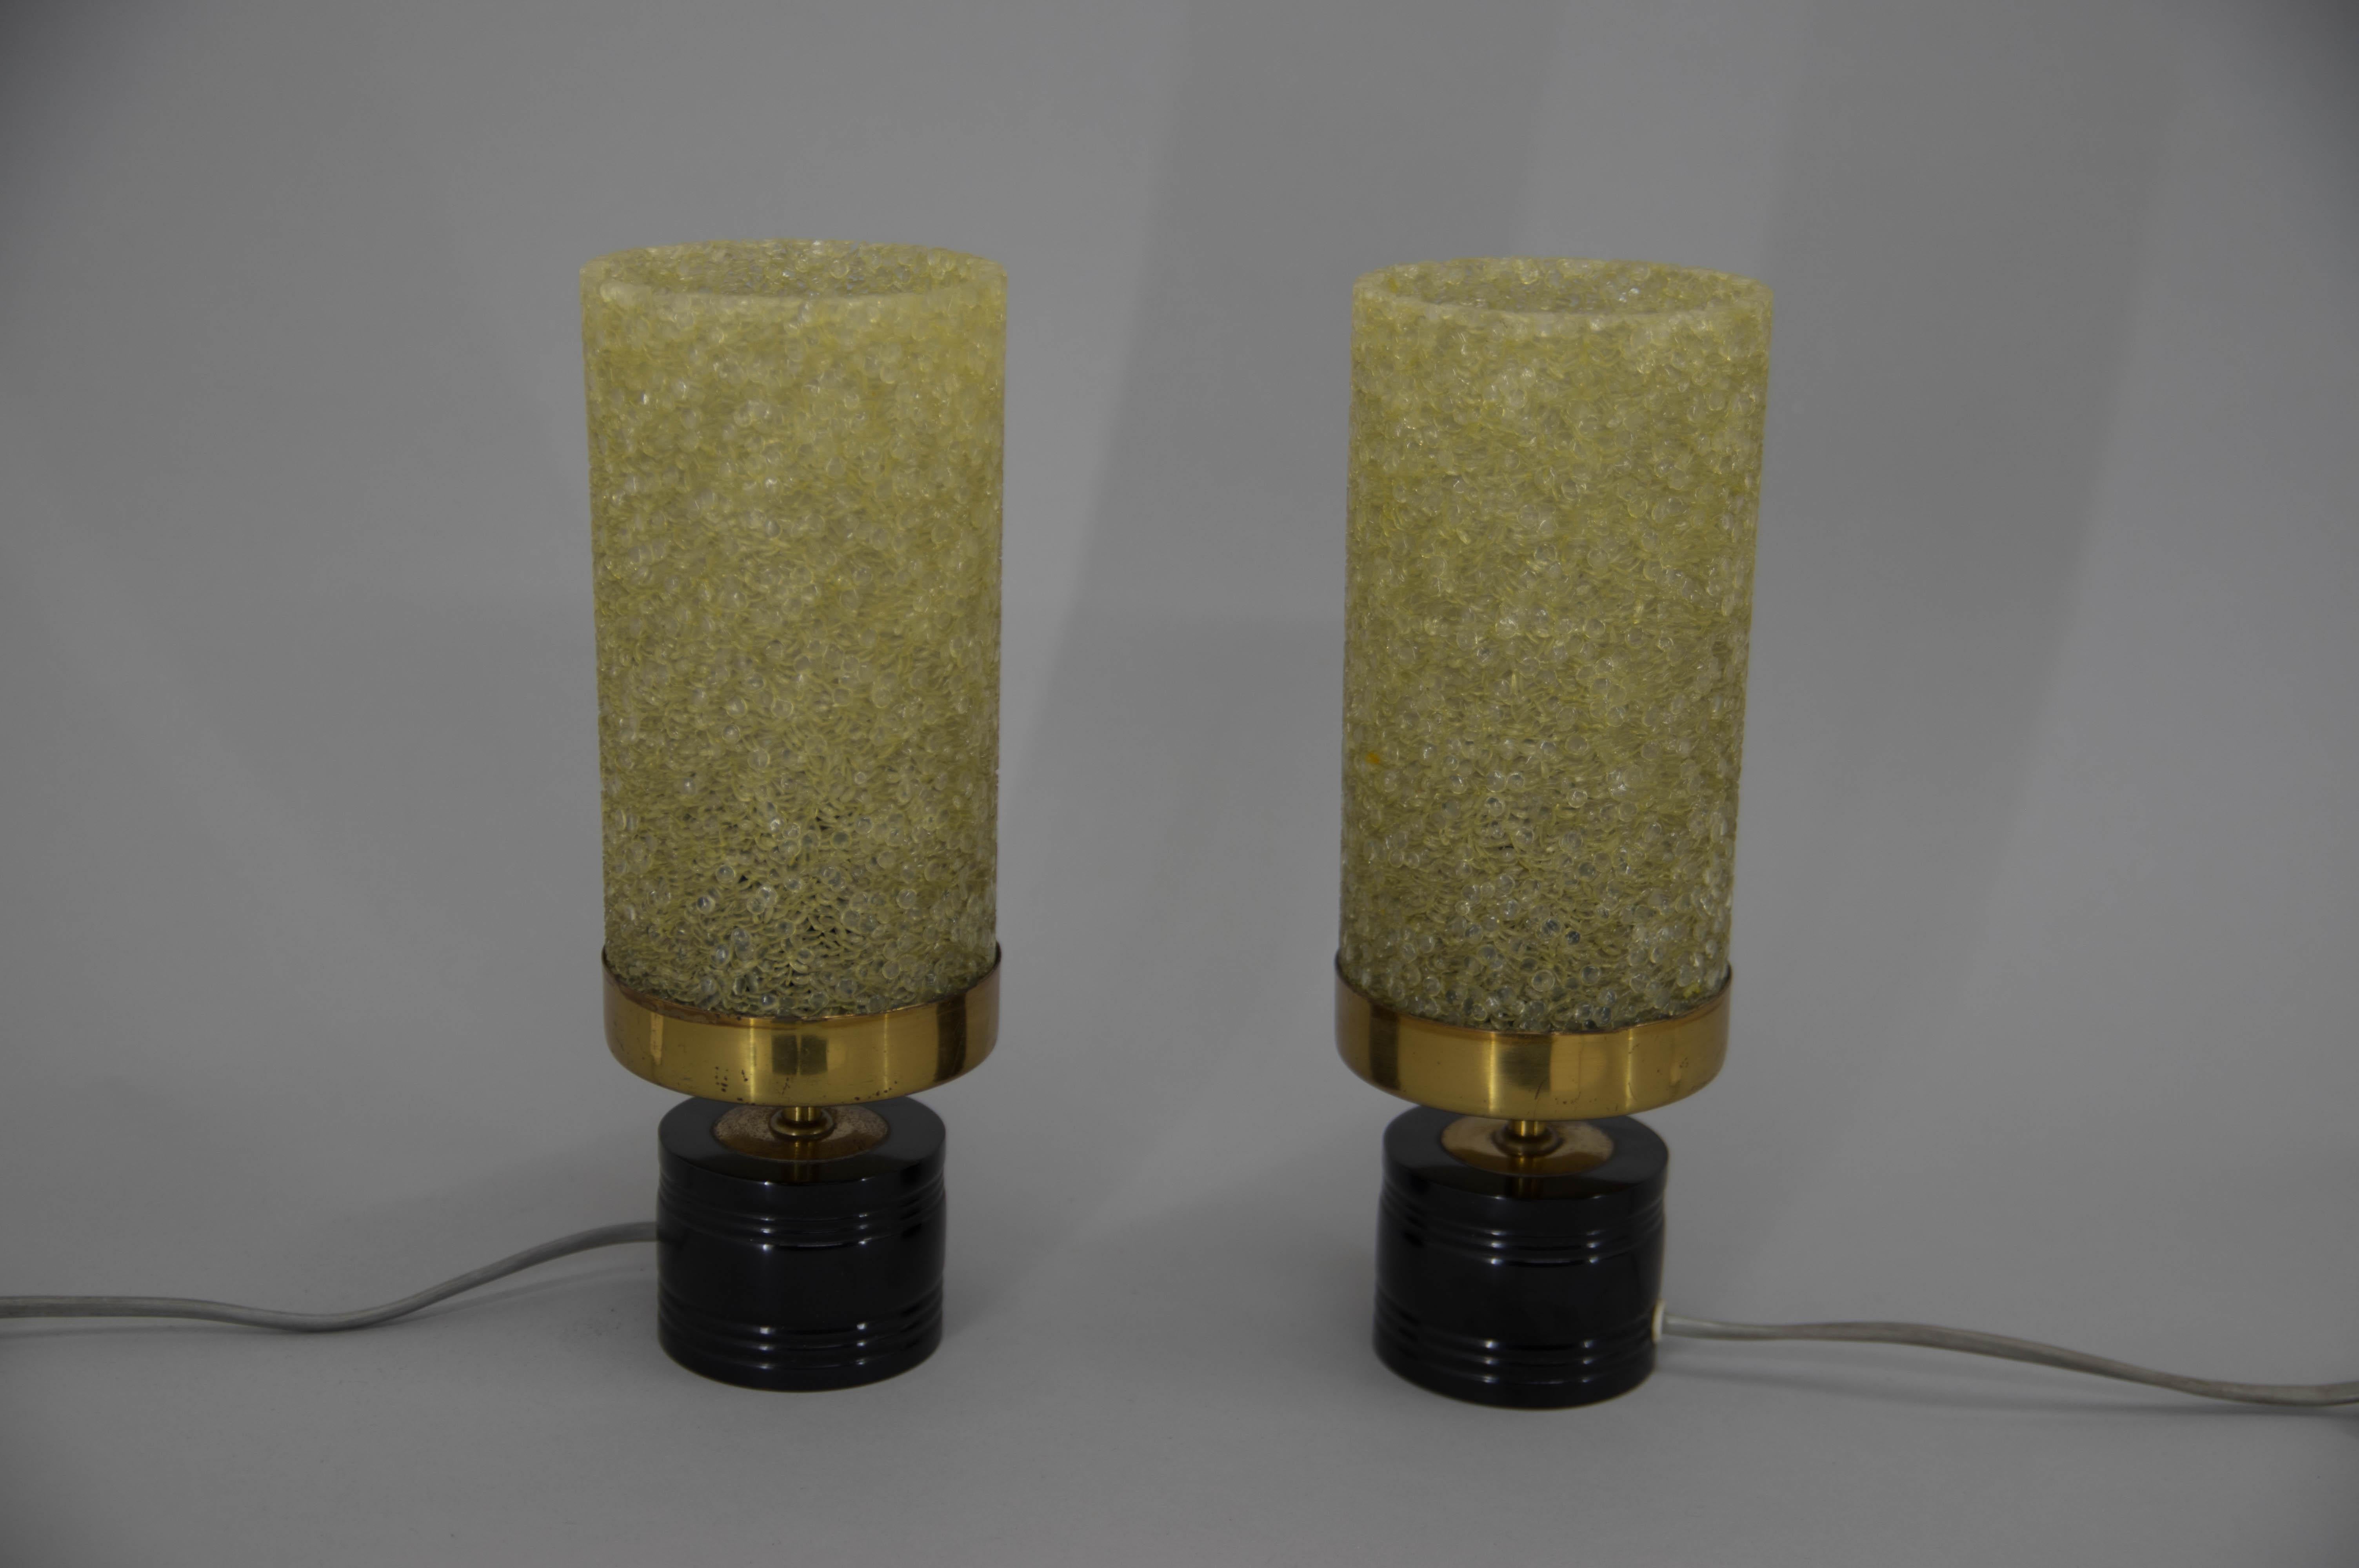 Table lamps made of metal, brass and resin
Measures: 1x40W, E25-E27 bulbs
US plug adapter included.